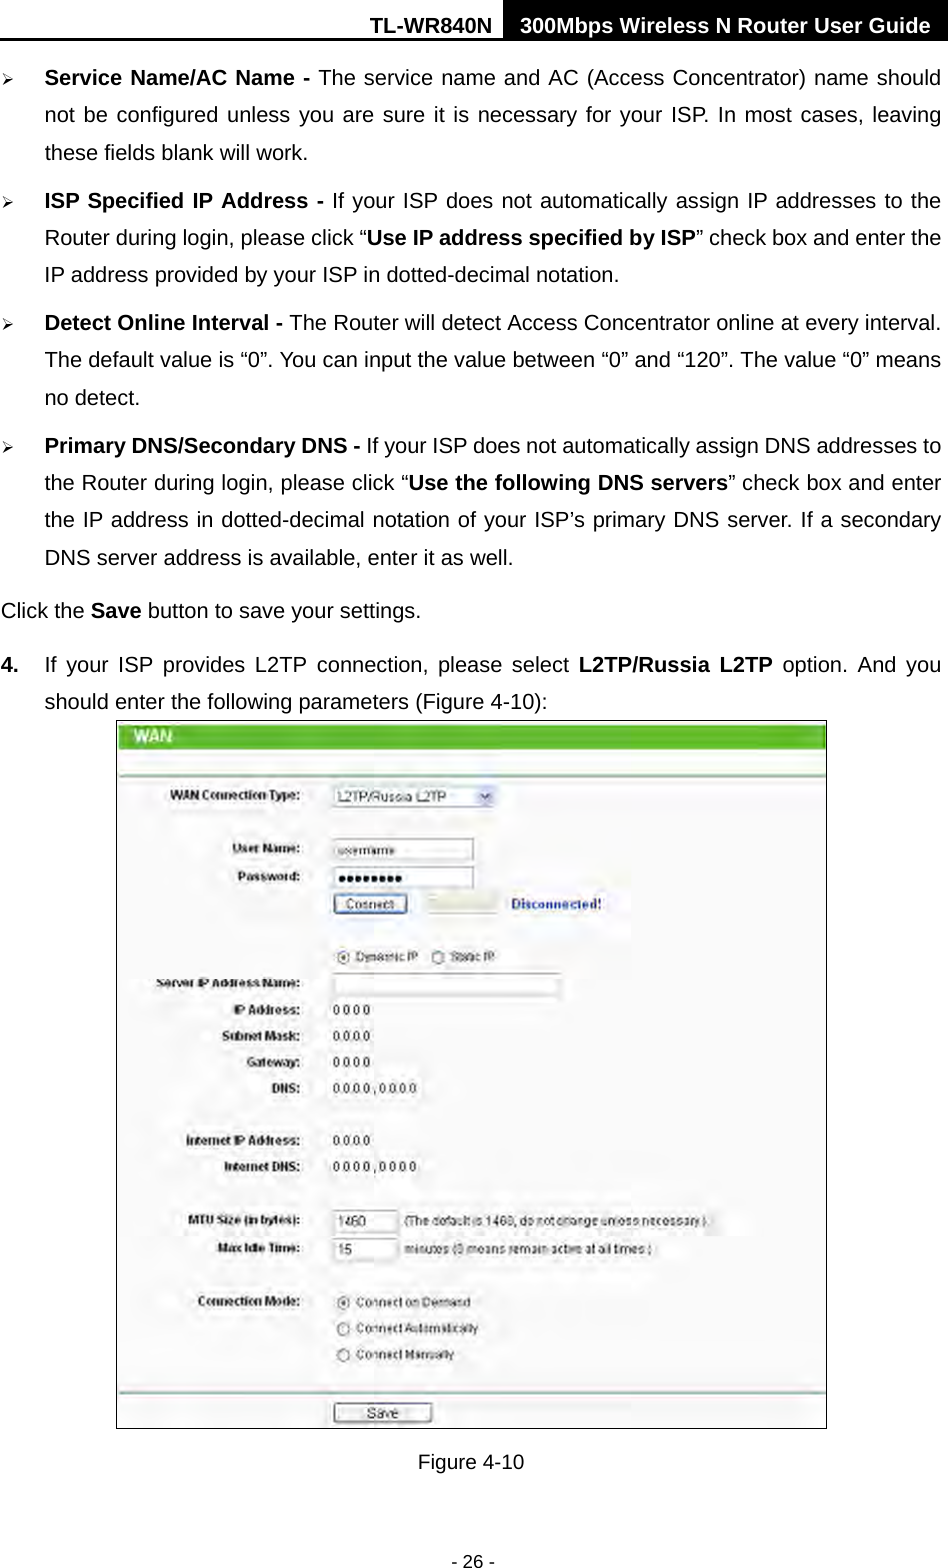 TL-WR840N 300Mbps Wireless N Router User Guide  - 26 -  Service Name/AC Name - The service name and AC (Access Concentrator) name should not be configured unless you are sure it is necessary for your ISP. In most cases, leaving these fields blank will work.  ISP Specified IP Address - If your ISP does not automatically assign IP addresses to the Router during login, please click “Use IP address specified by ISP” check box and enter the IP address provided by your ISP in dotted-decimal notation.  Detect Online Interval - The Router will detect Access Concentrator online at every interval. The default value is “0”. You can input the value between “0” and “120”. The value “0” means no detect.  Primary DNS/Secondary DNS - If your ISP does not automatically assign DNS addresses to the Router during login, please click “Use the following DNS servers” check box and enter the IP address in dotted-decimal notation of your ISP’s primary DNS server. If a secondary DNS server address is available, enter it as well. Click the Save button to save your settings. 4. If your ISP provides L2TP connection, please select L2TP/Russia L2TP option.  And  you should enter the following parameters (Figure 4-10):  Figure 4-10 